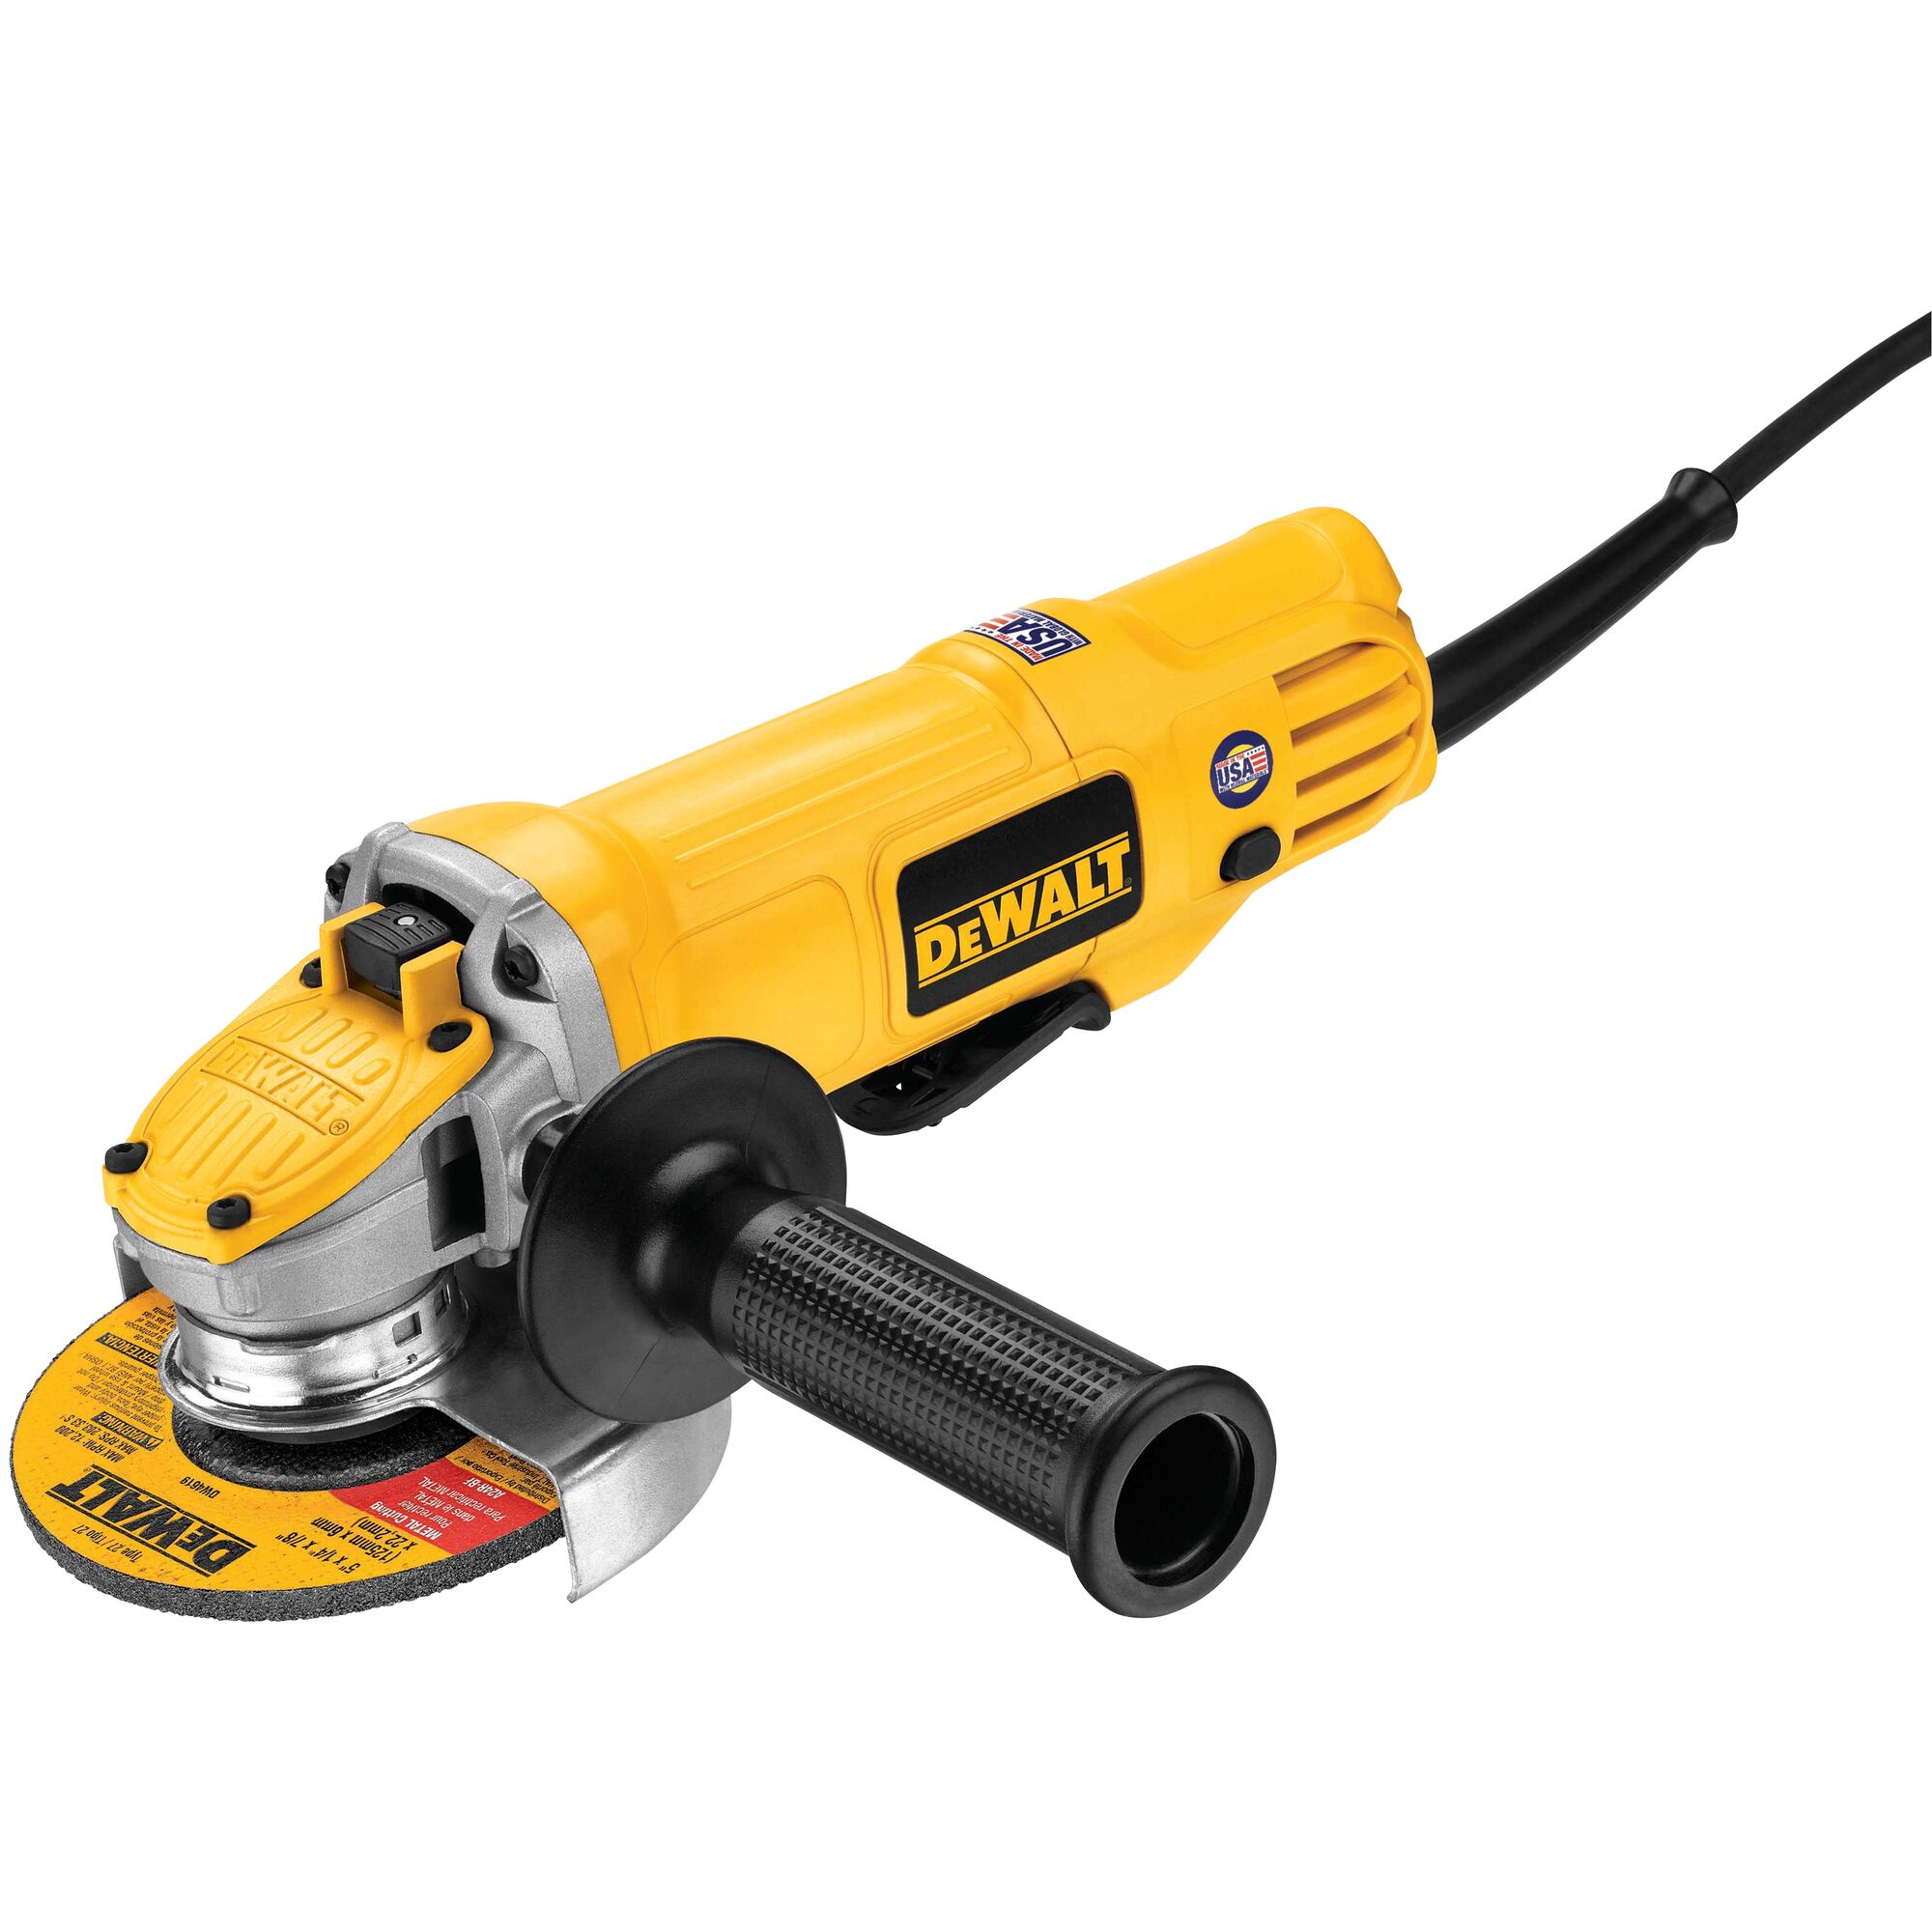 4.5-in Paddle Switch Corded Angle Grinder the Angle Grinders at Lowes.com